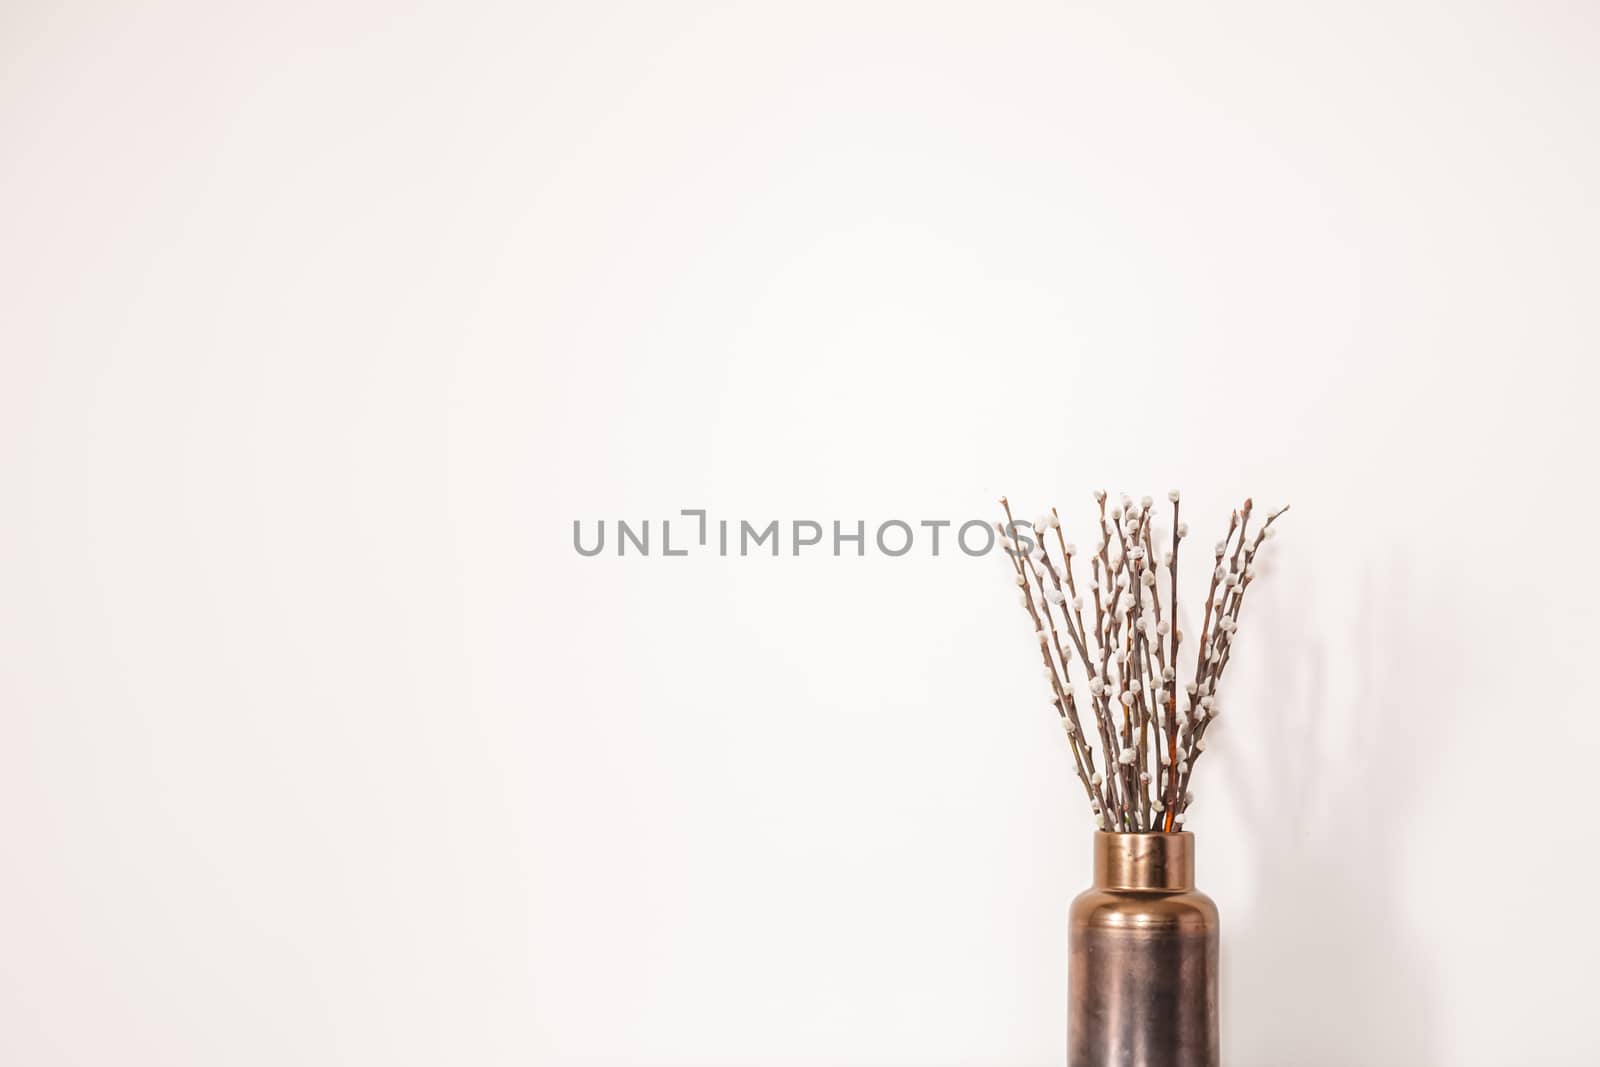 Twigs with buds in a vase against the white wall. Concept of early spring, March, nature awakening or anticipation of warm season